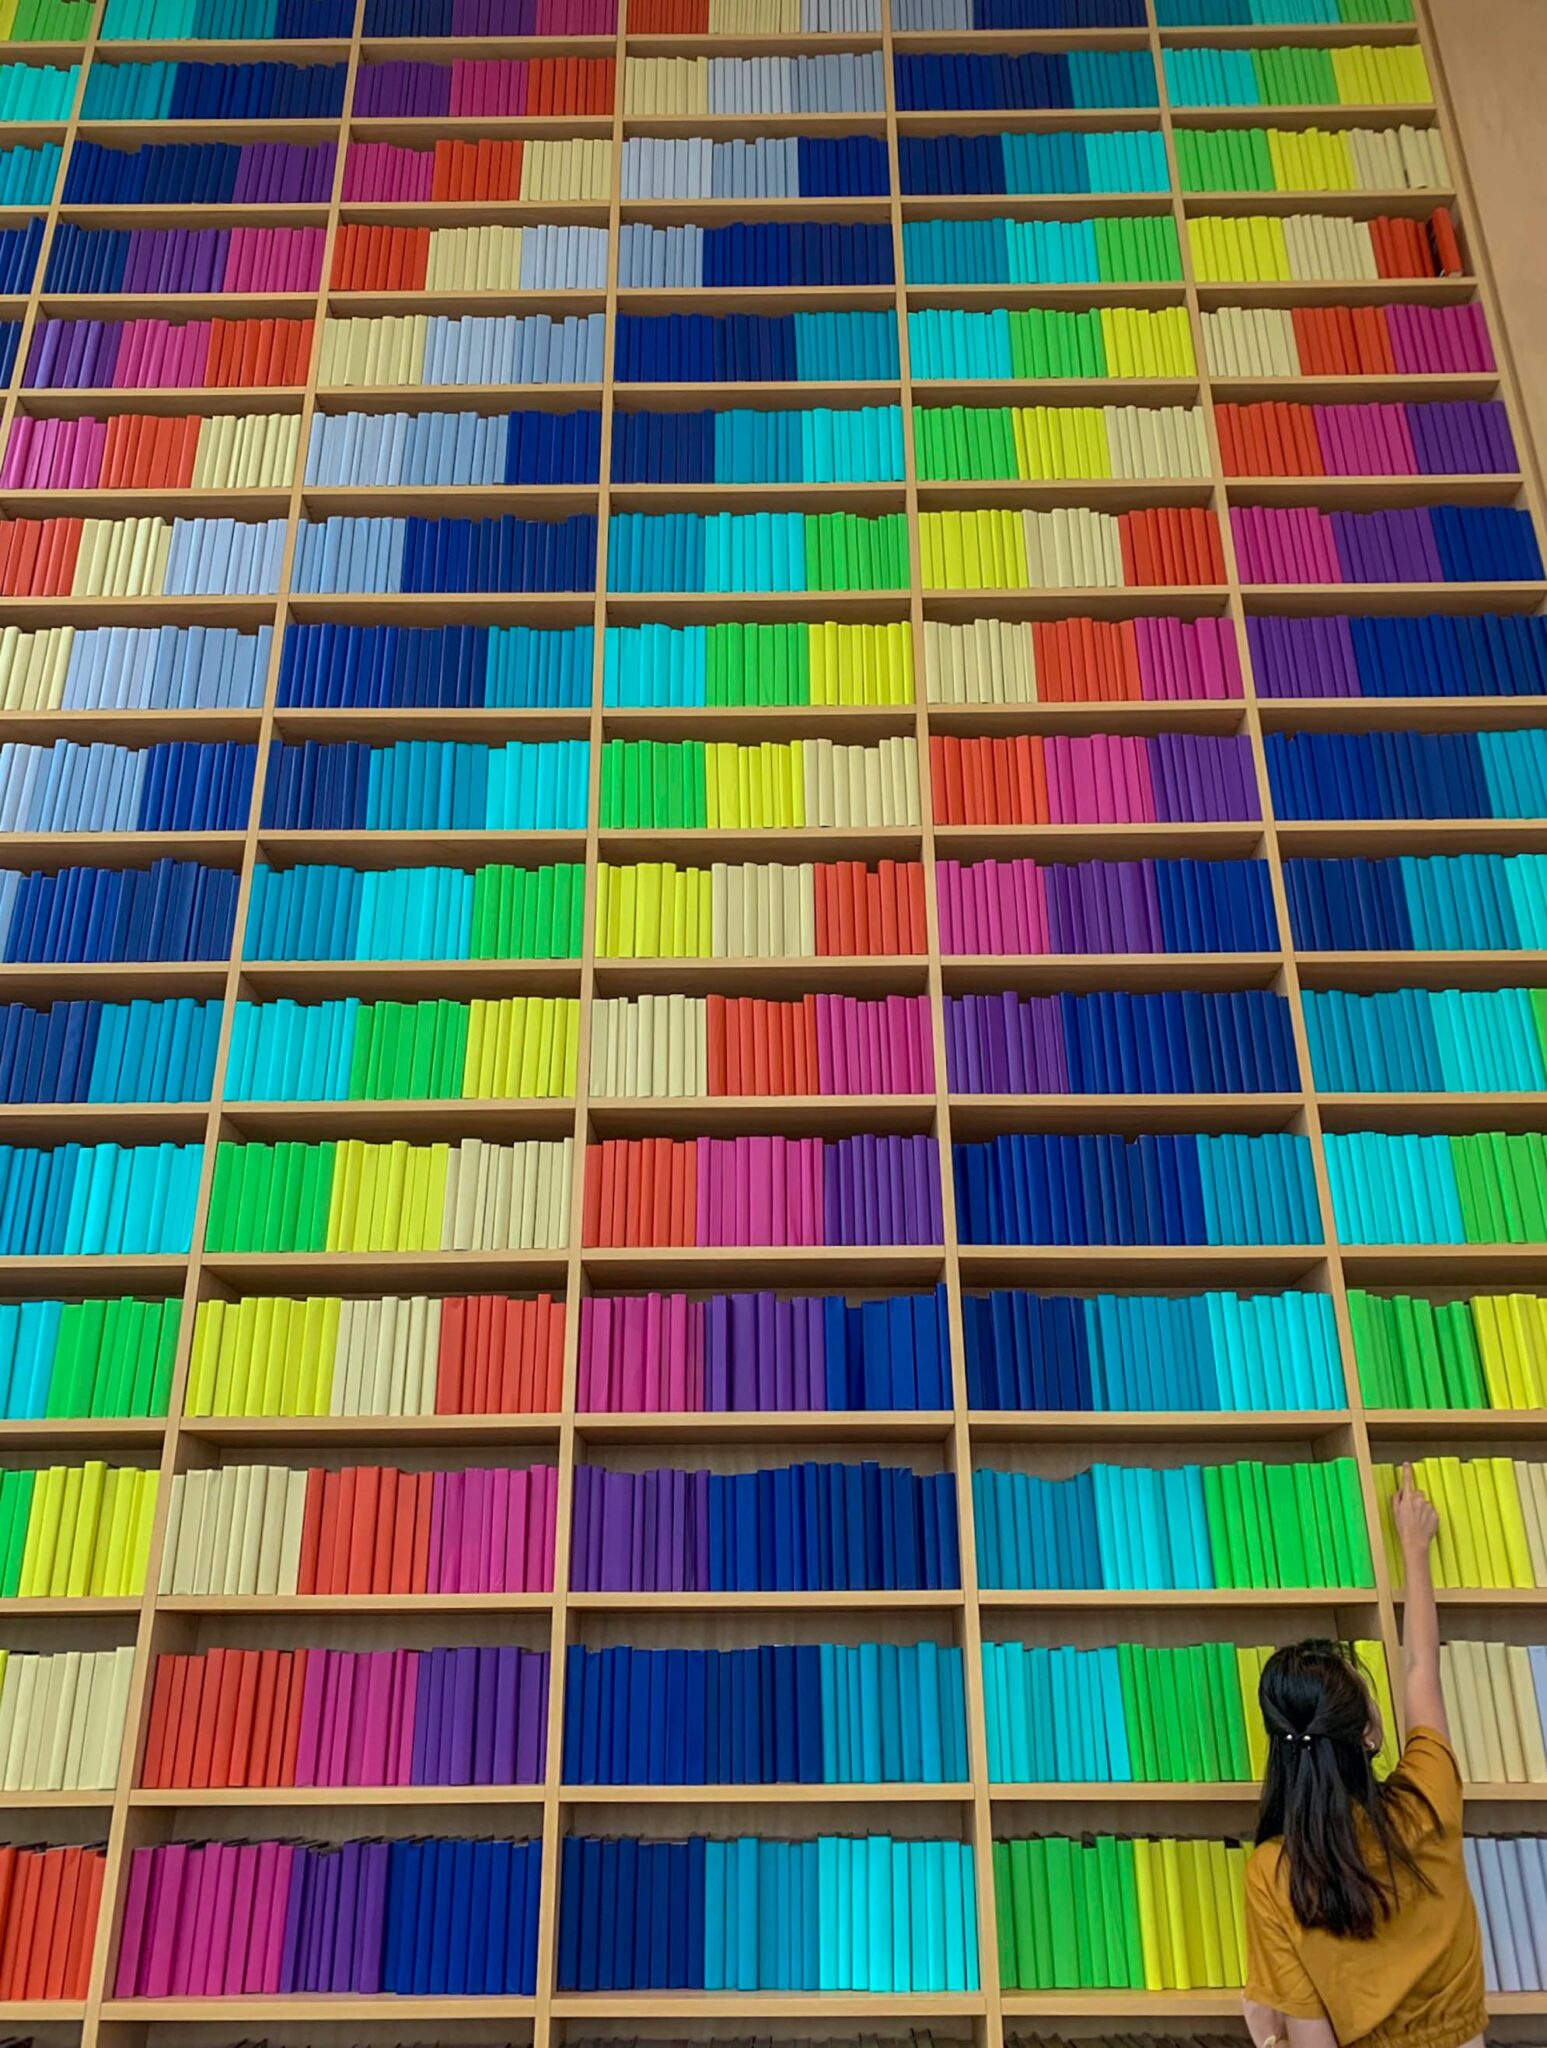 Wall of colorful books